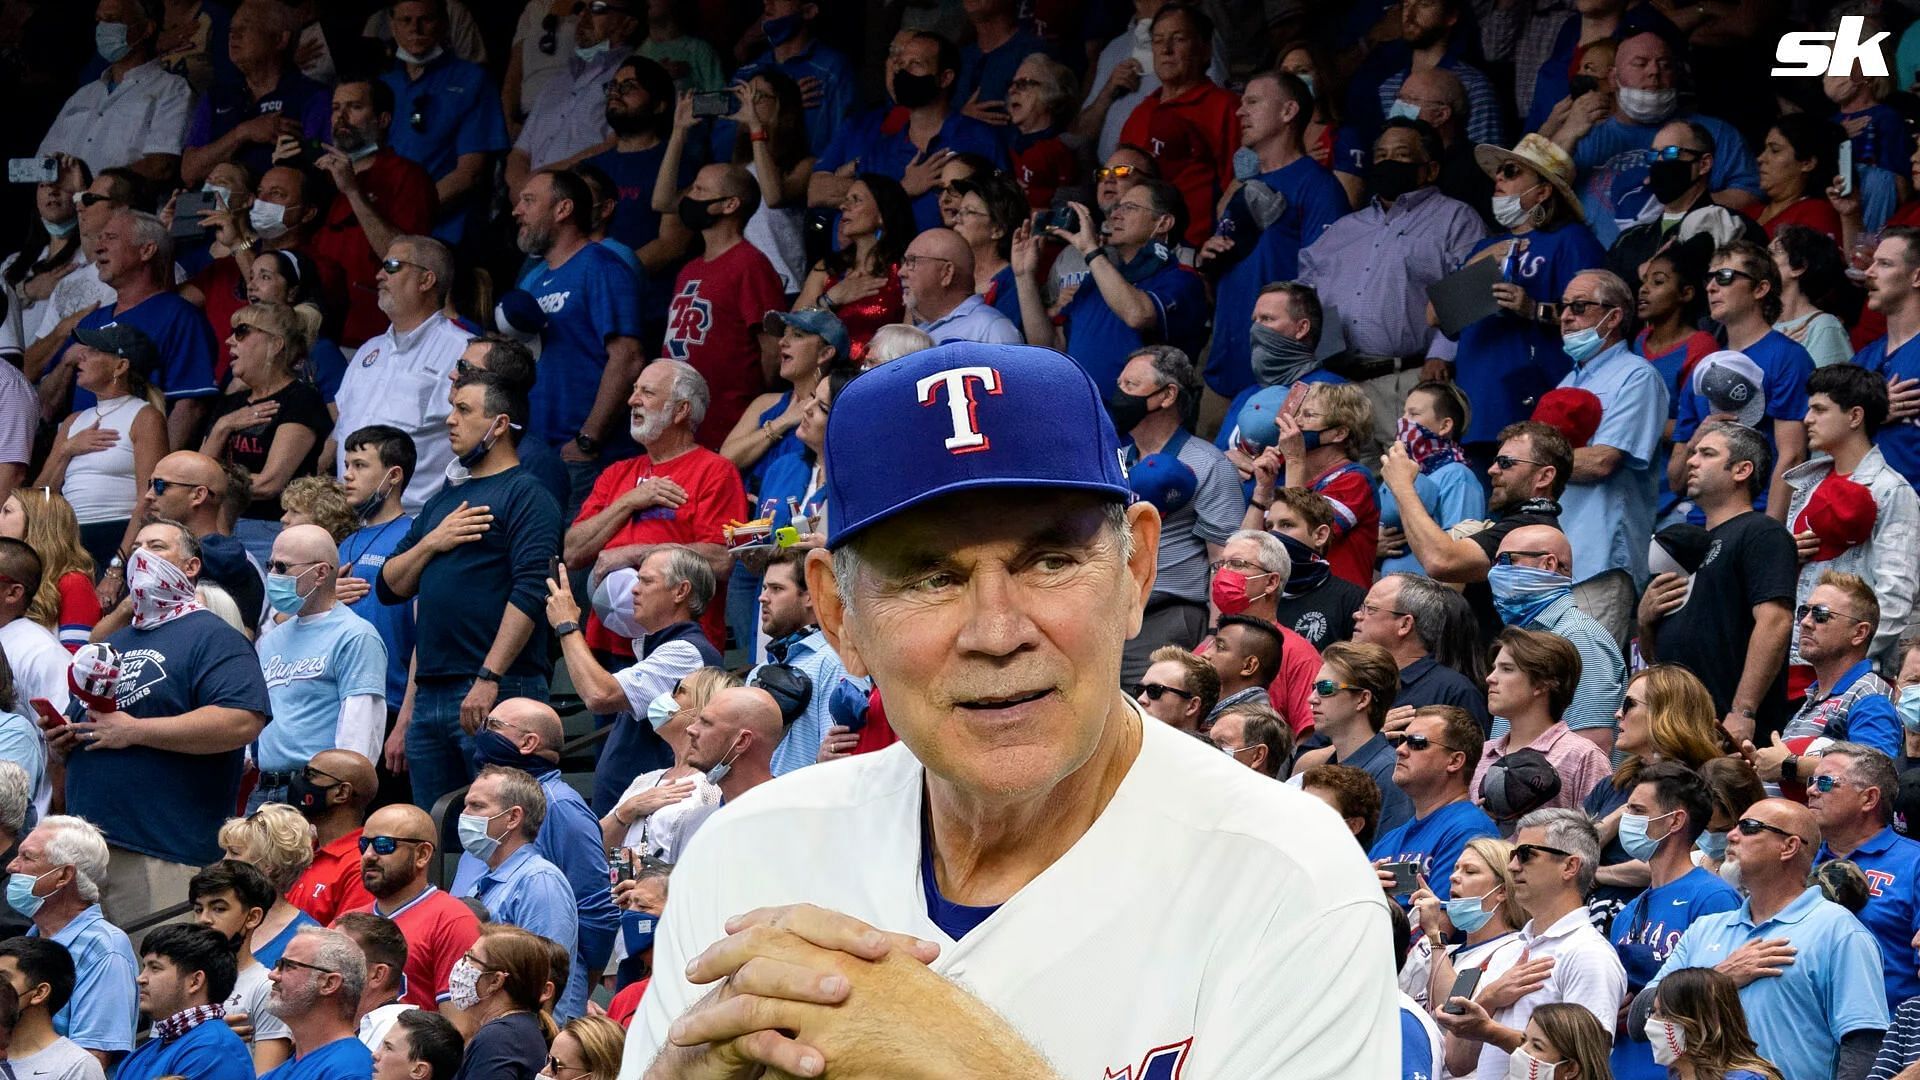 Bruce Bochy gave credit to his Rangers team